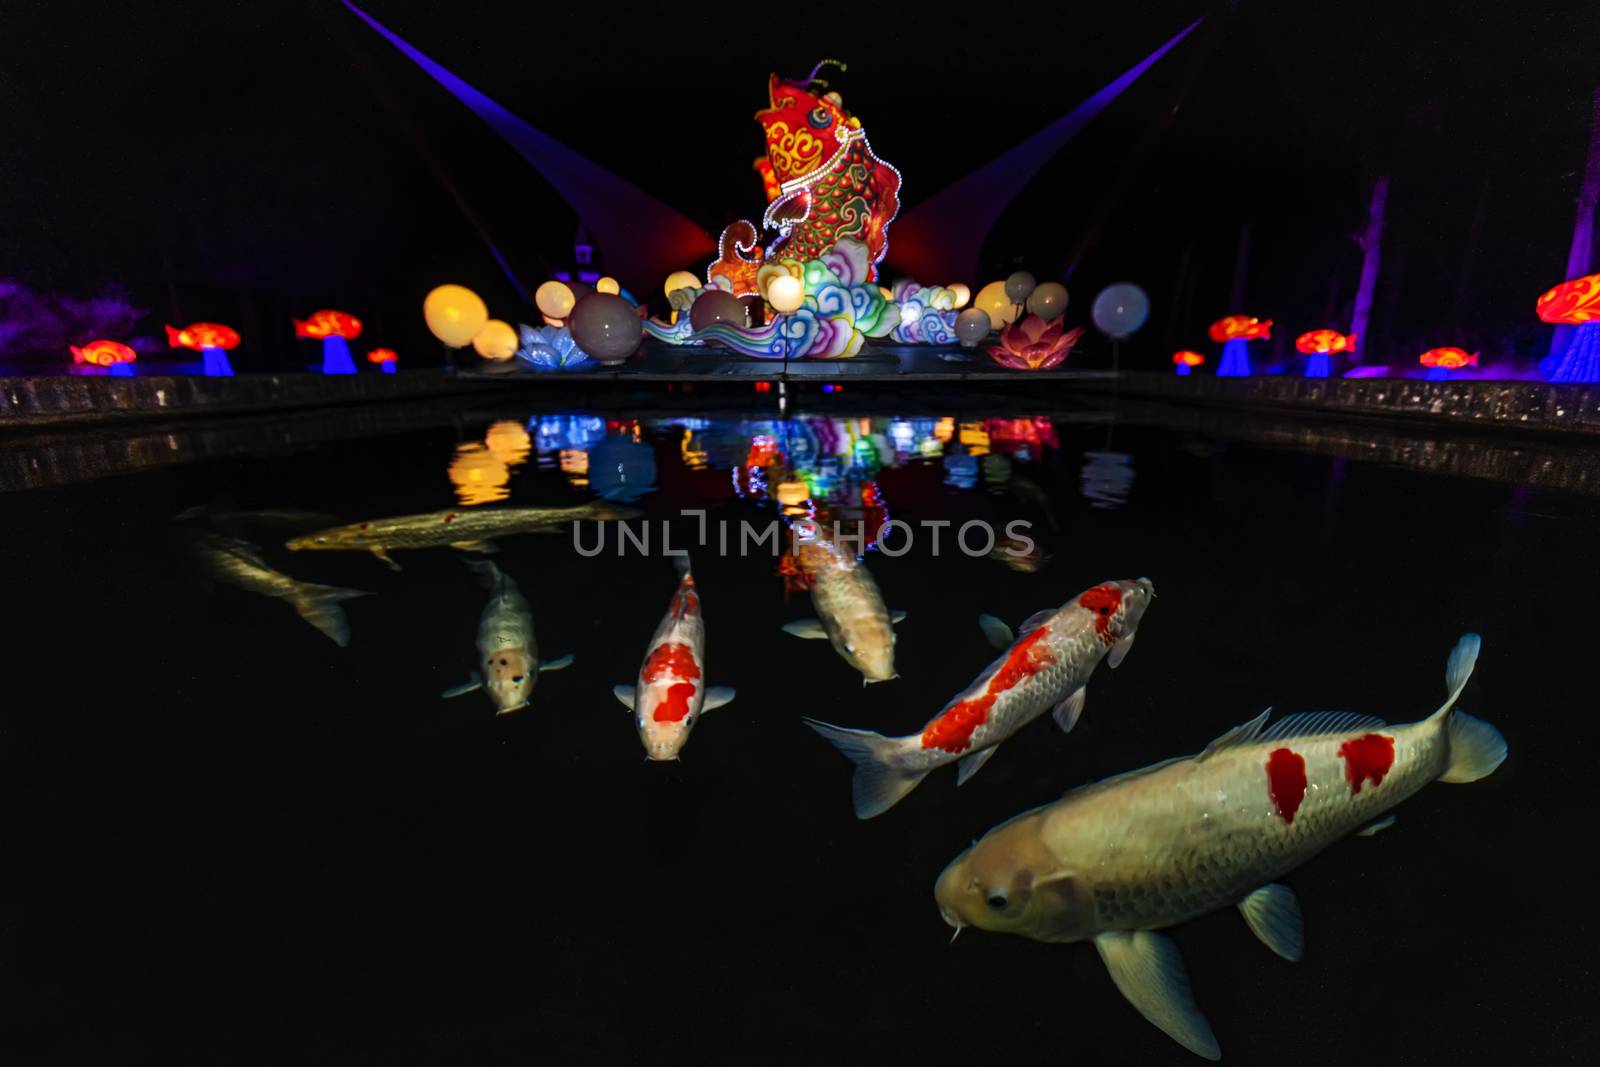 Illumination reflection on the flat water with big and colorful Koi fishes